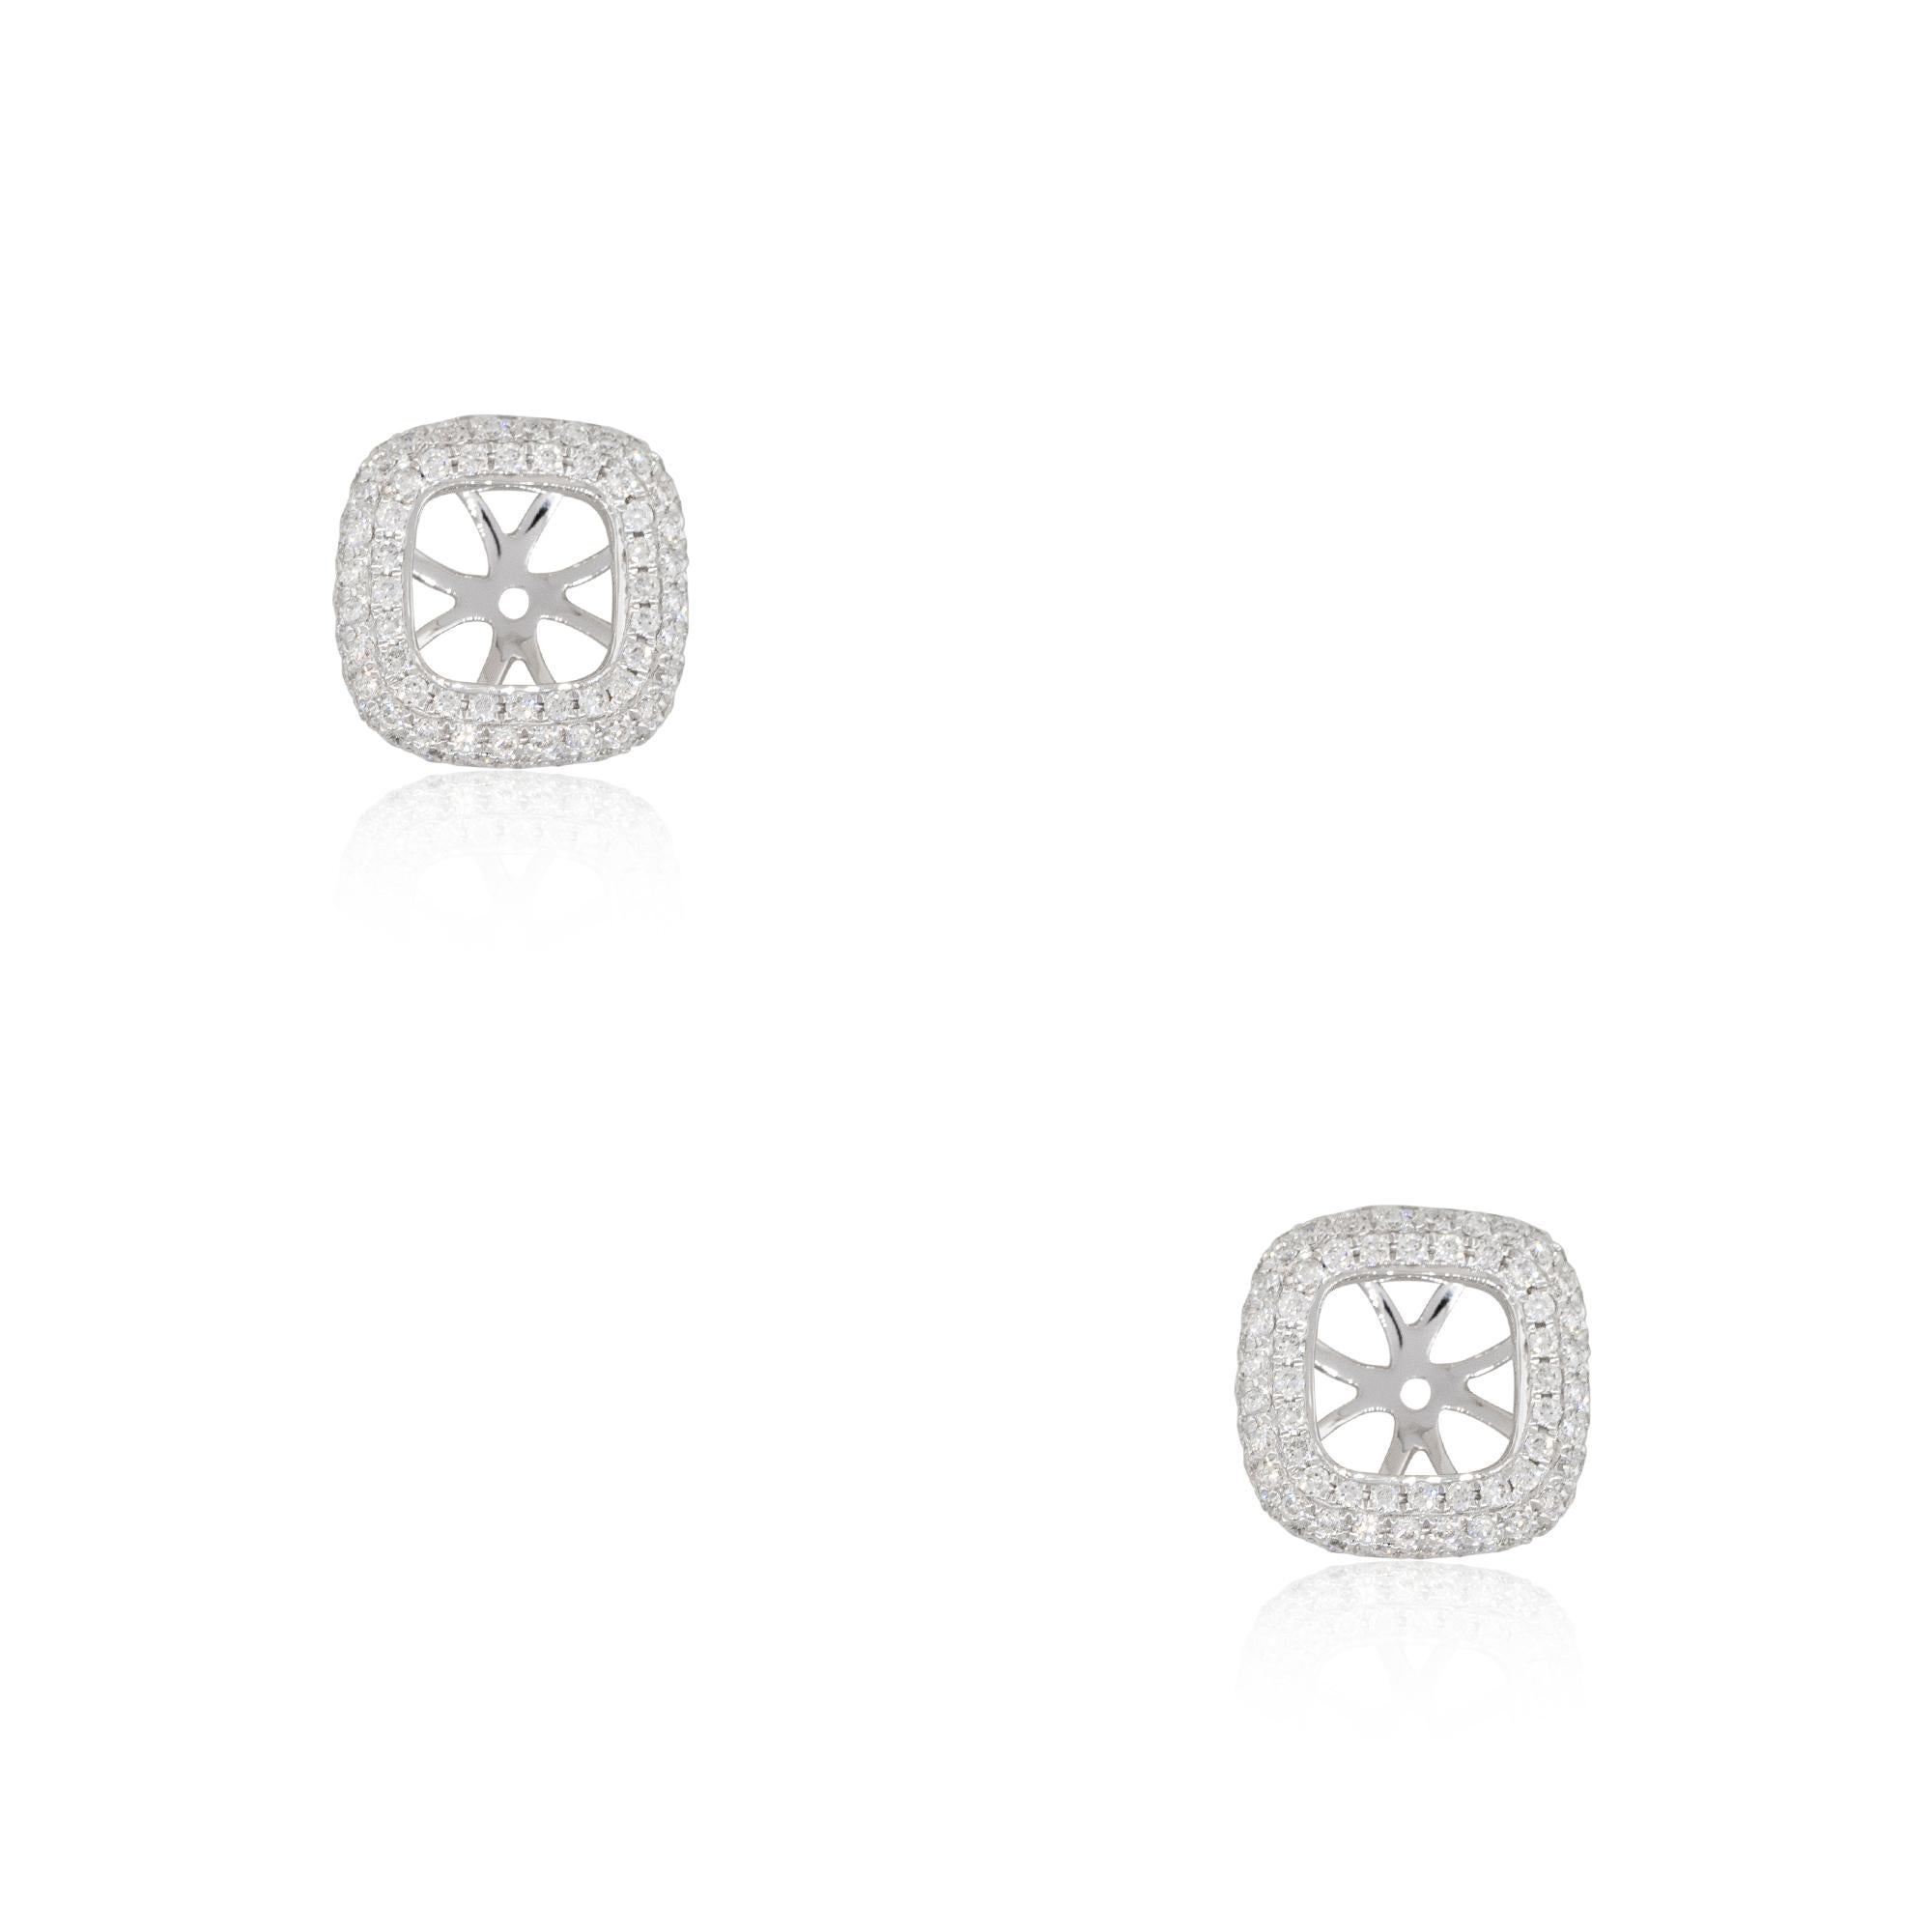 18k White Gold 0.87ctw Diamond Pave Stud Earring Jackets
Material: Stud Jackets- 18k White Gold
Diamond/Earring Jacket Details:	Approximately 0.87ctw of Pave Diamonds. There are 160 stones total
Dimensions: Jacket opening- 6.5mm x 6.5mm
-	Diamond